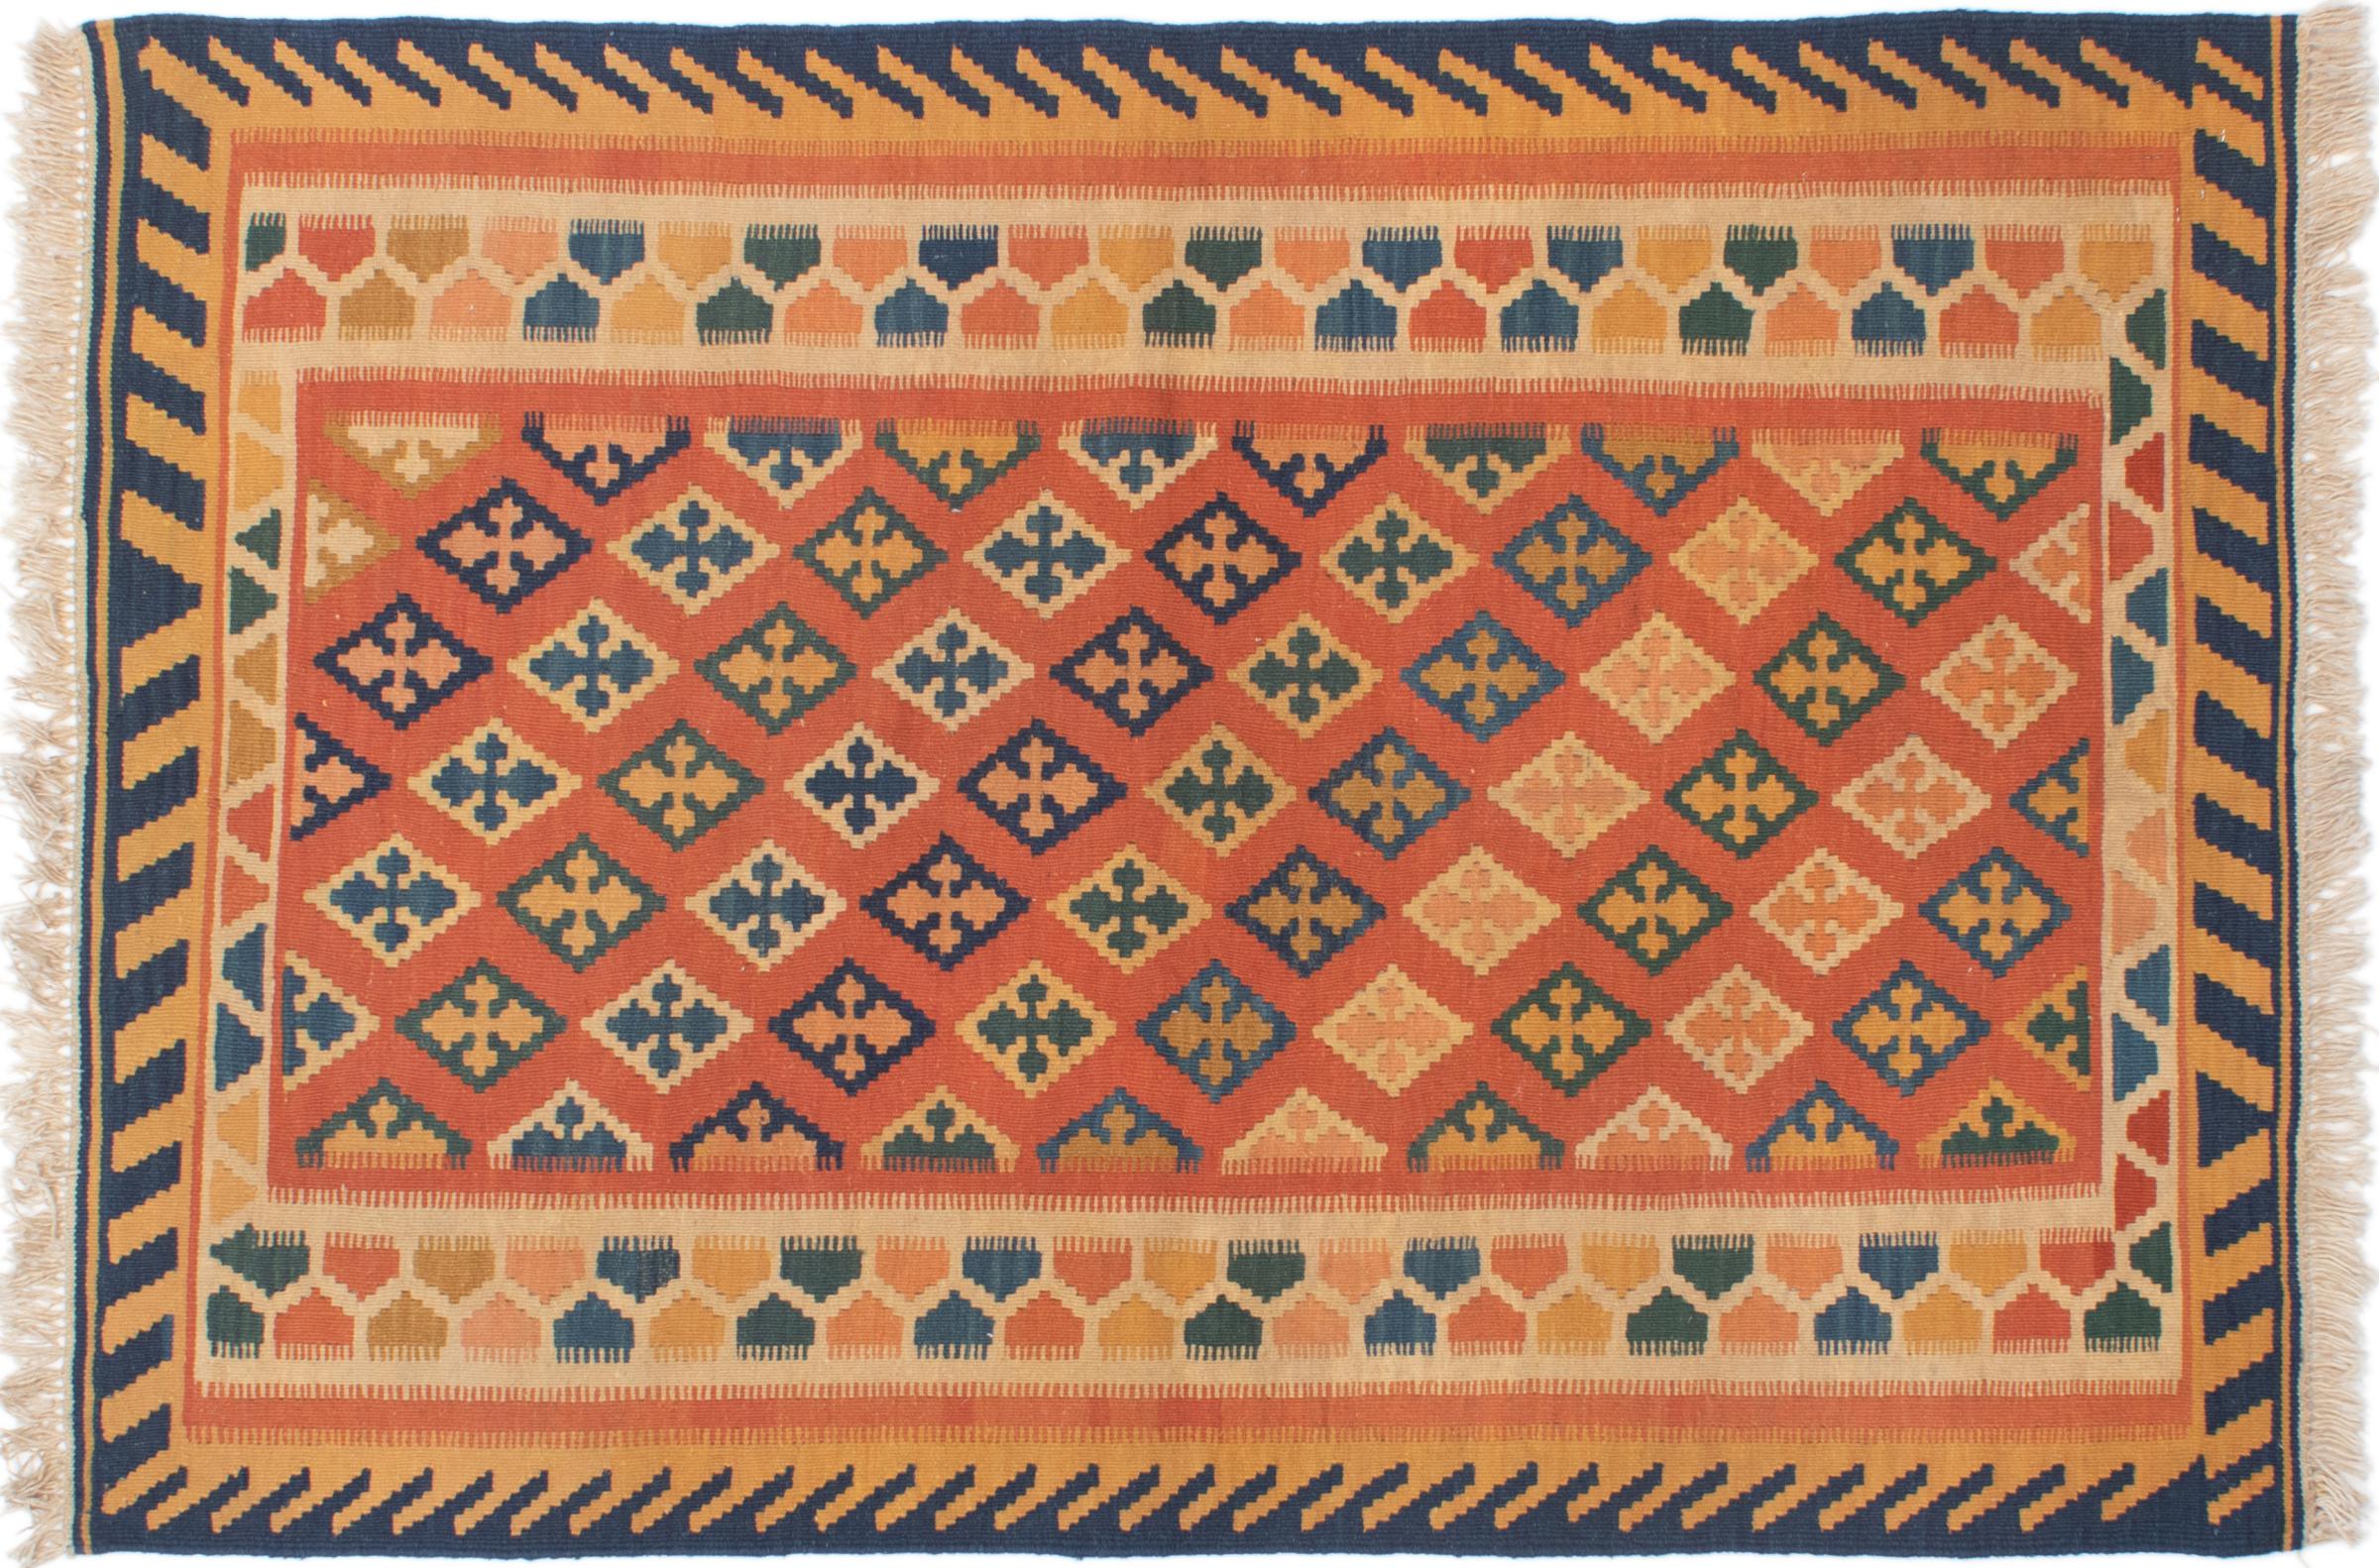 Sold at Auction: Hand Knotted Kilm Rug 4x3 ft